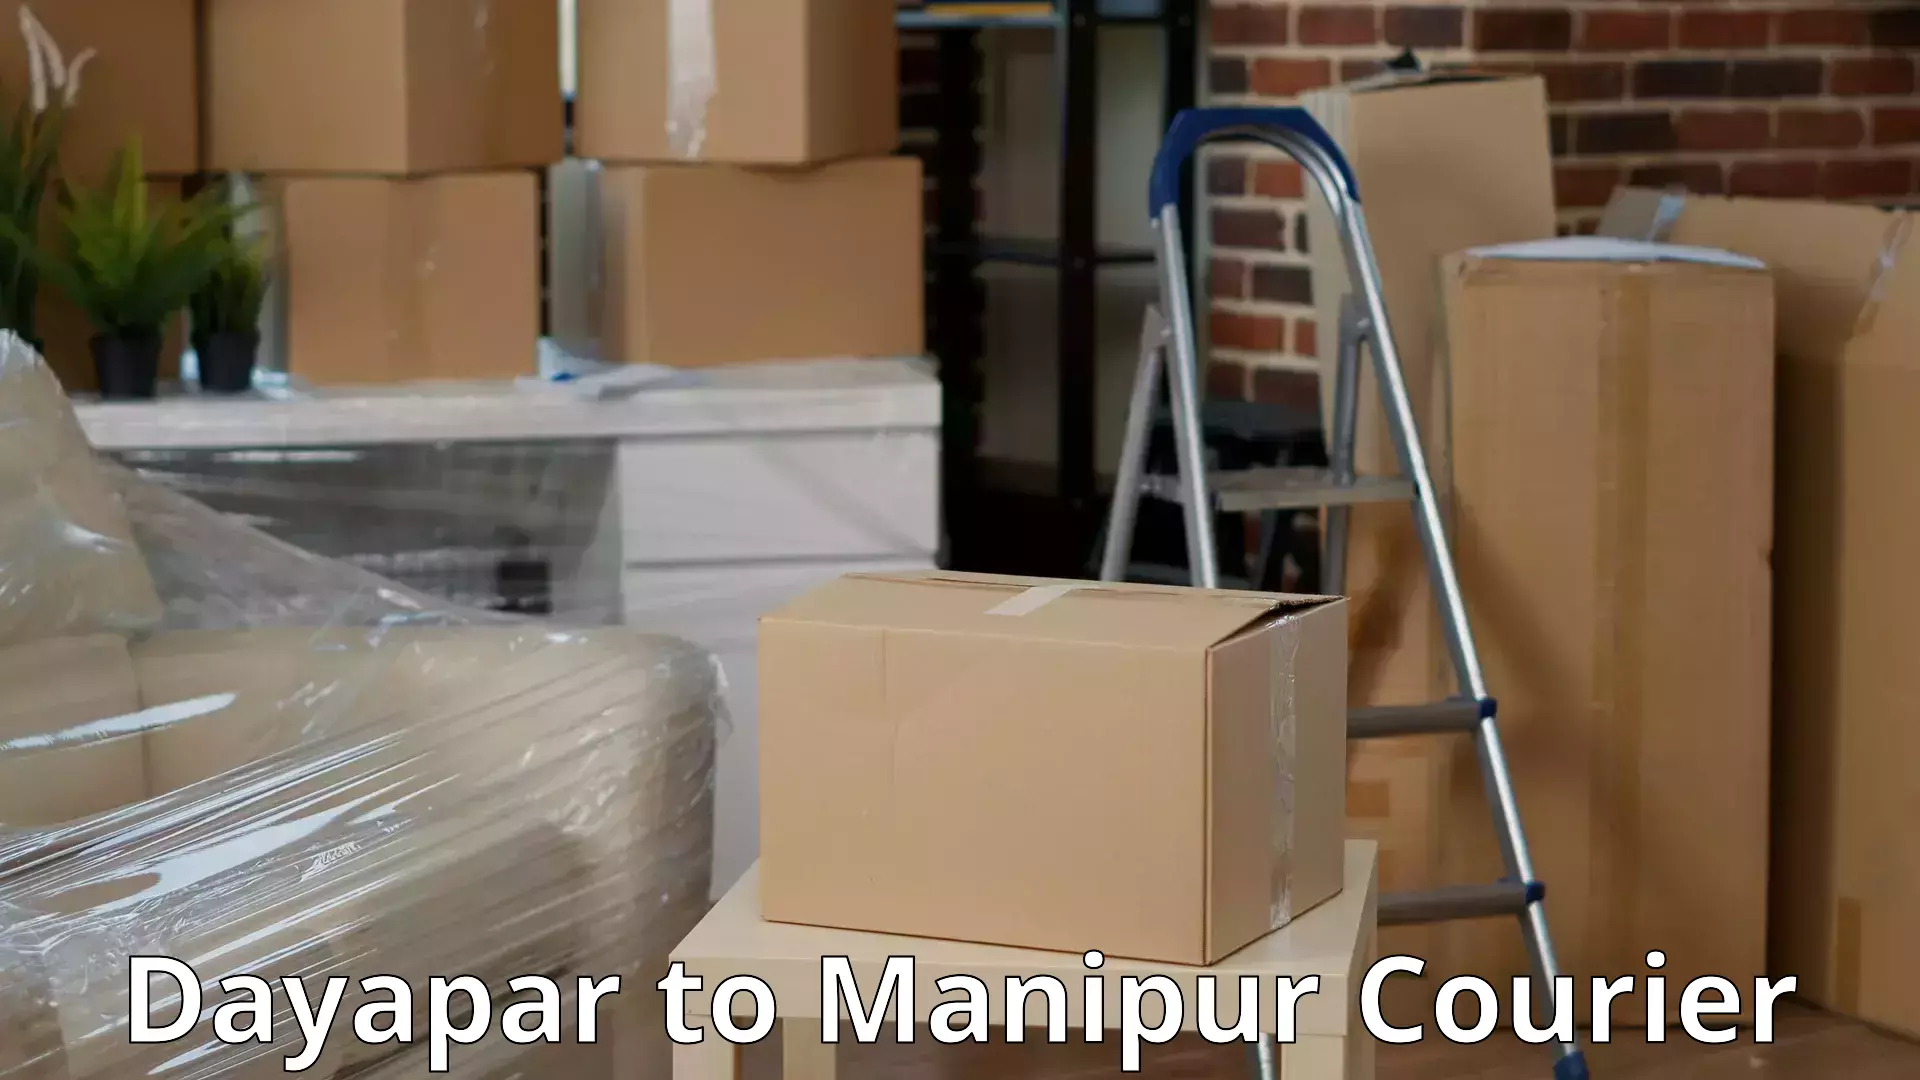 Moving and packing experts Dayapar to Manipur